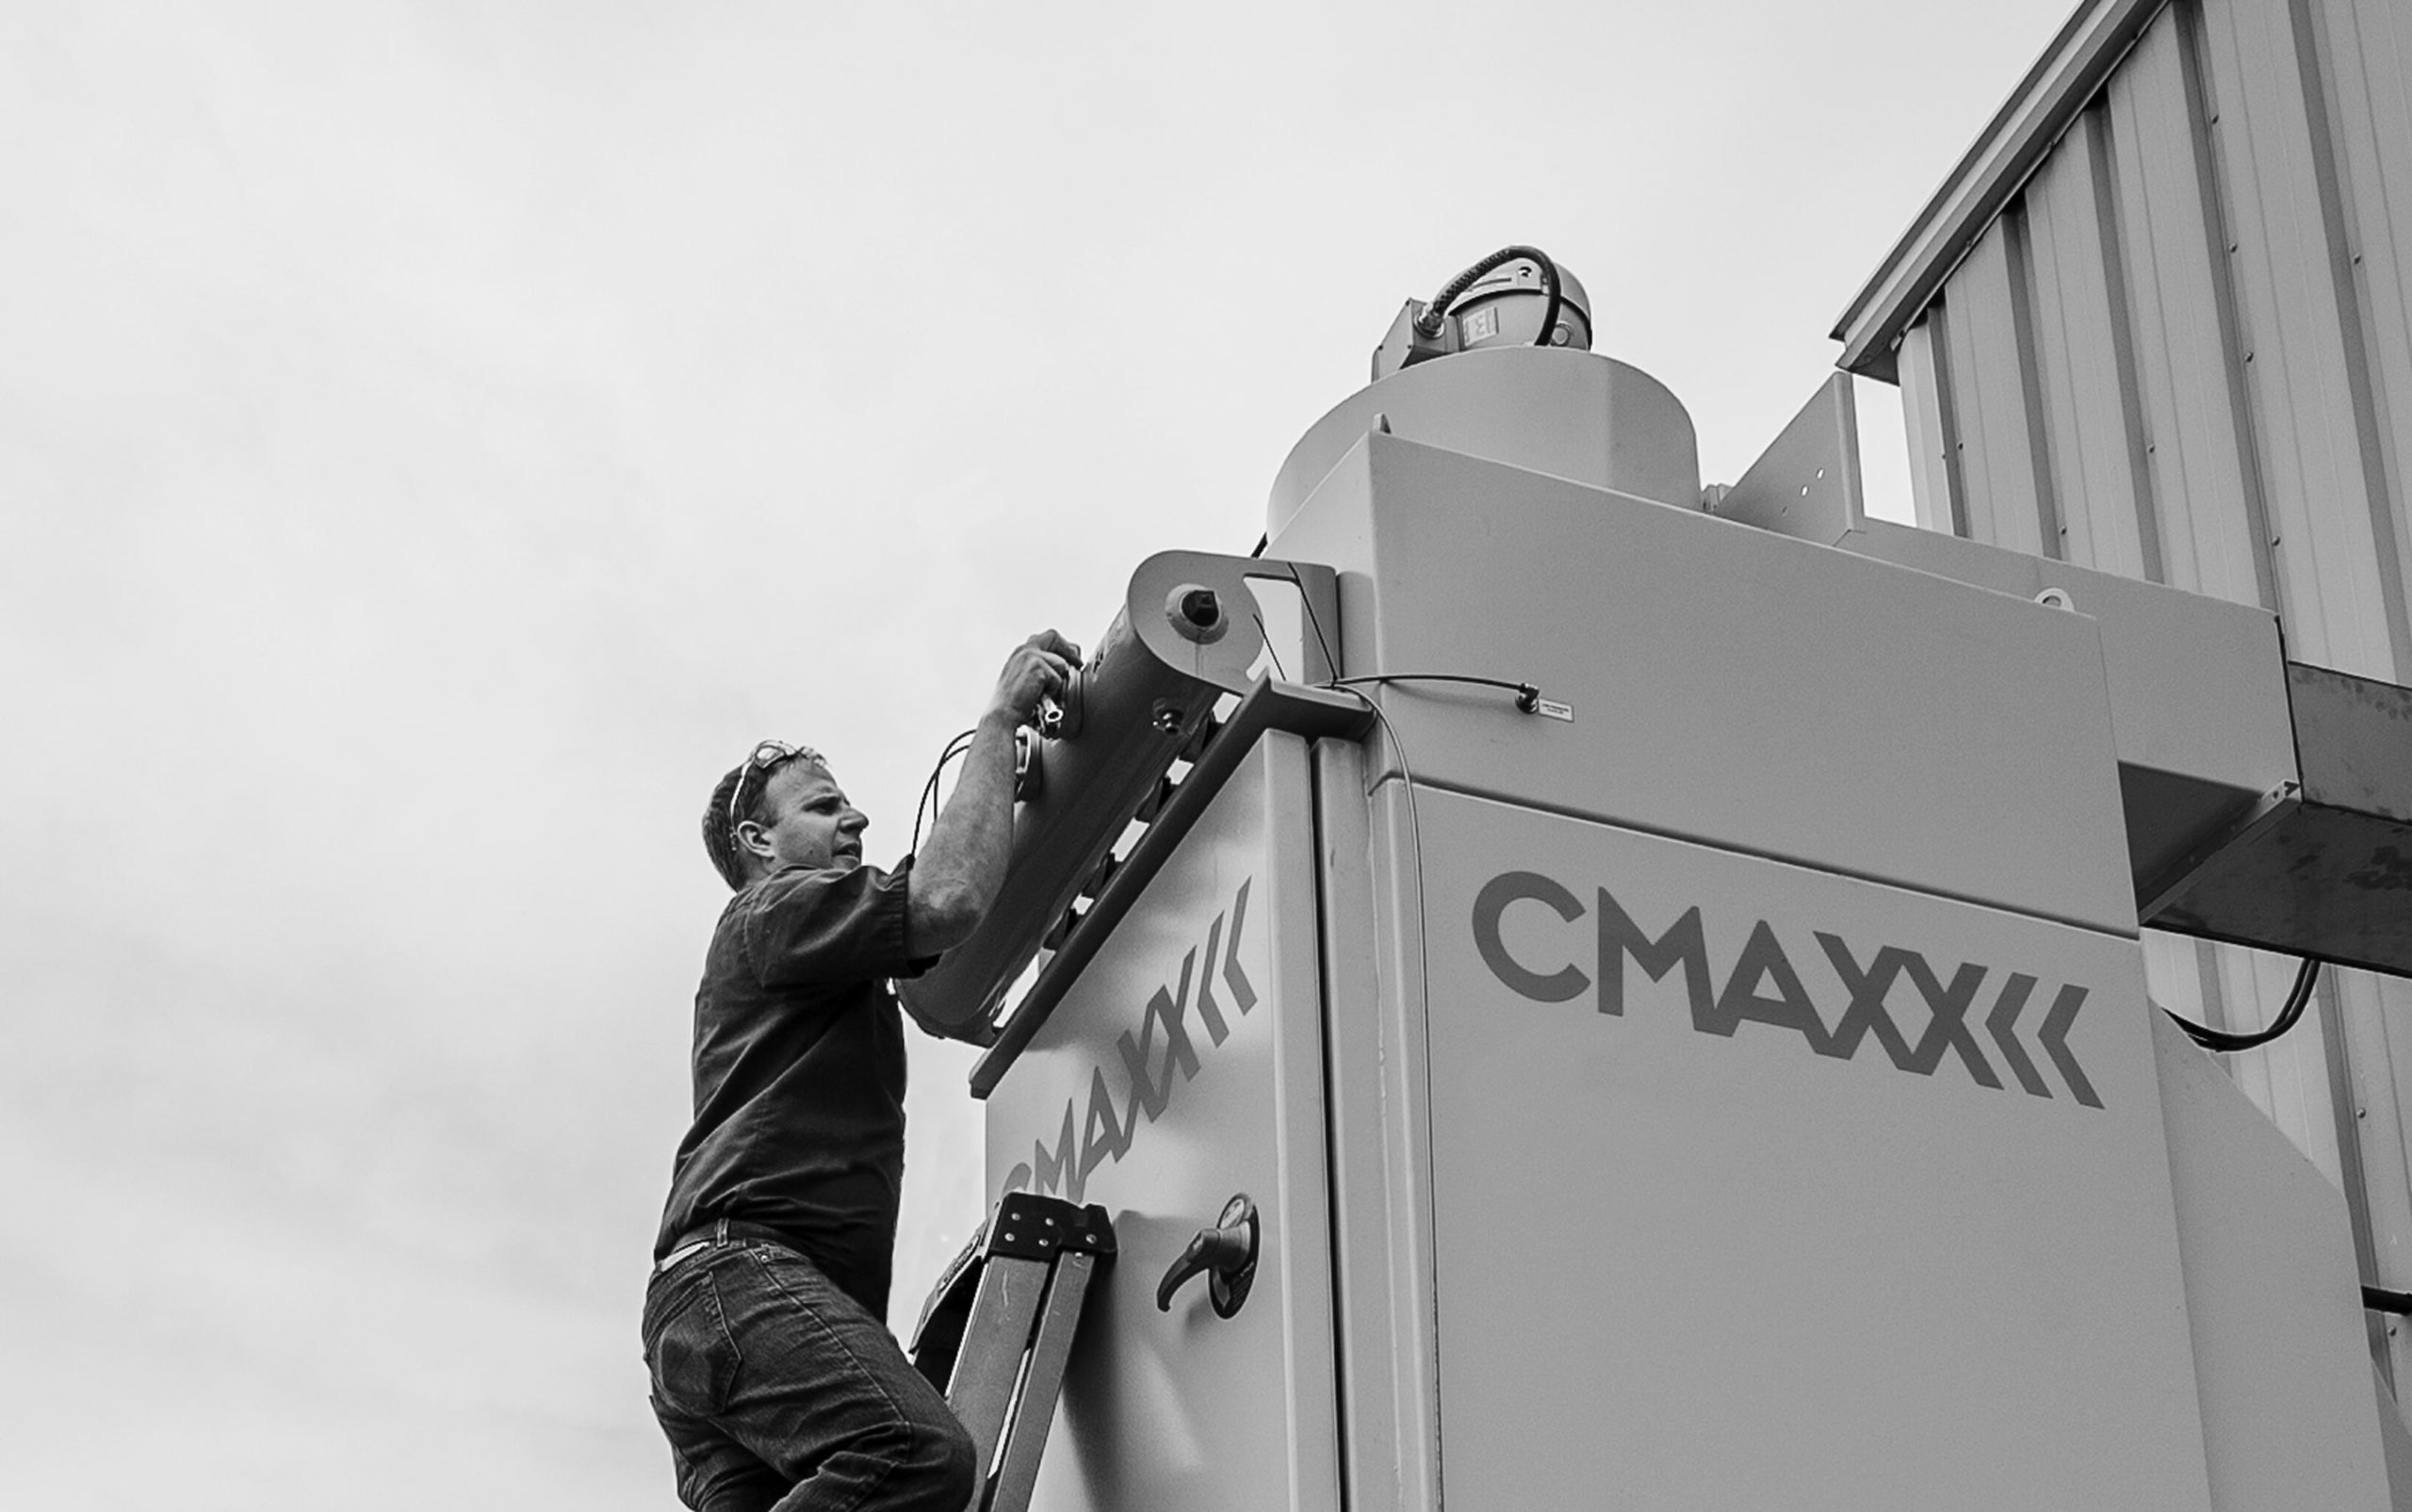 Serviceman inspecting compressed air header valves on a CMAXX dust and fume collector installation